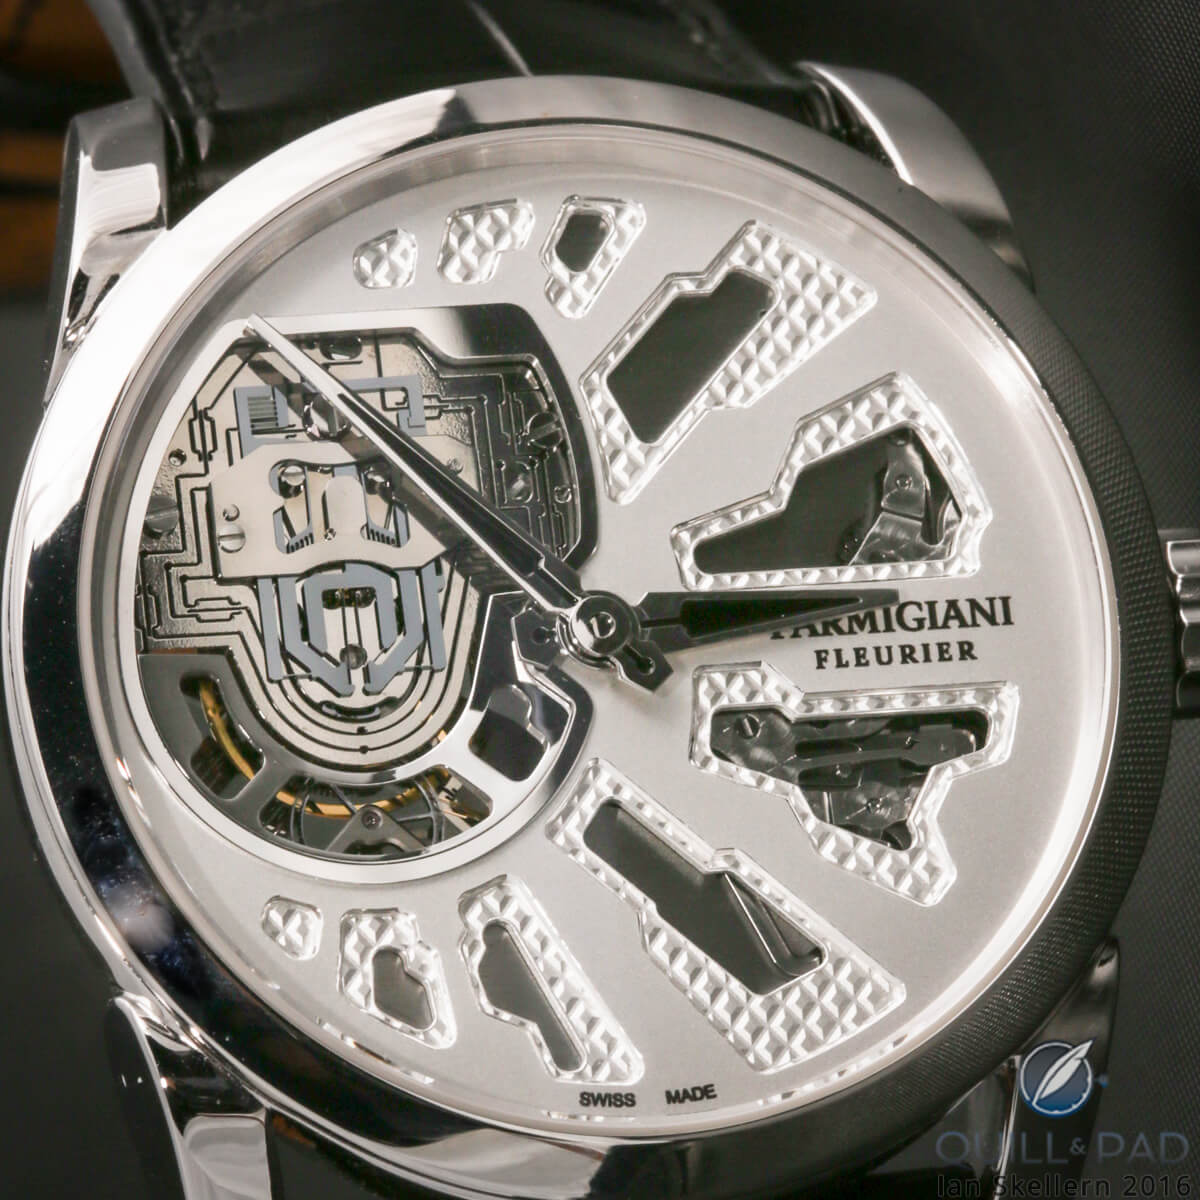 Close up look at the dial side of the Parmigiani Senfine concept watch